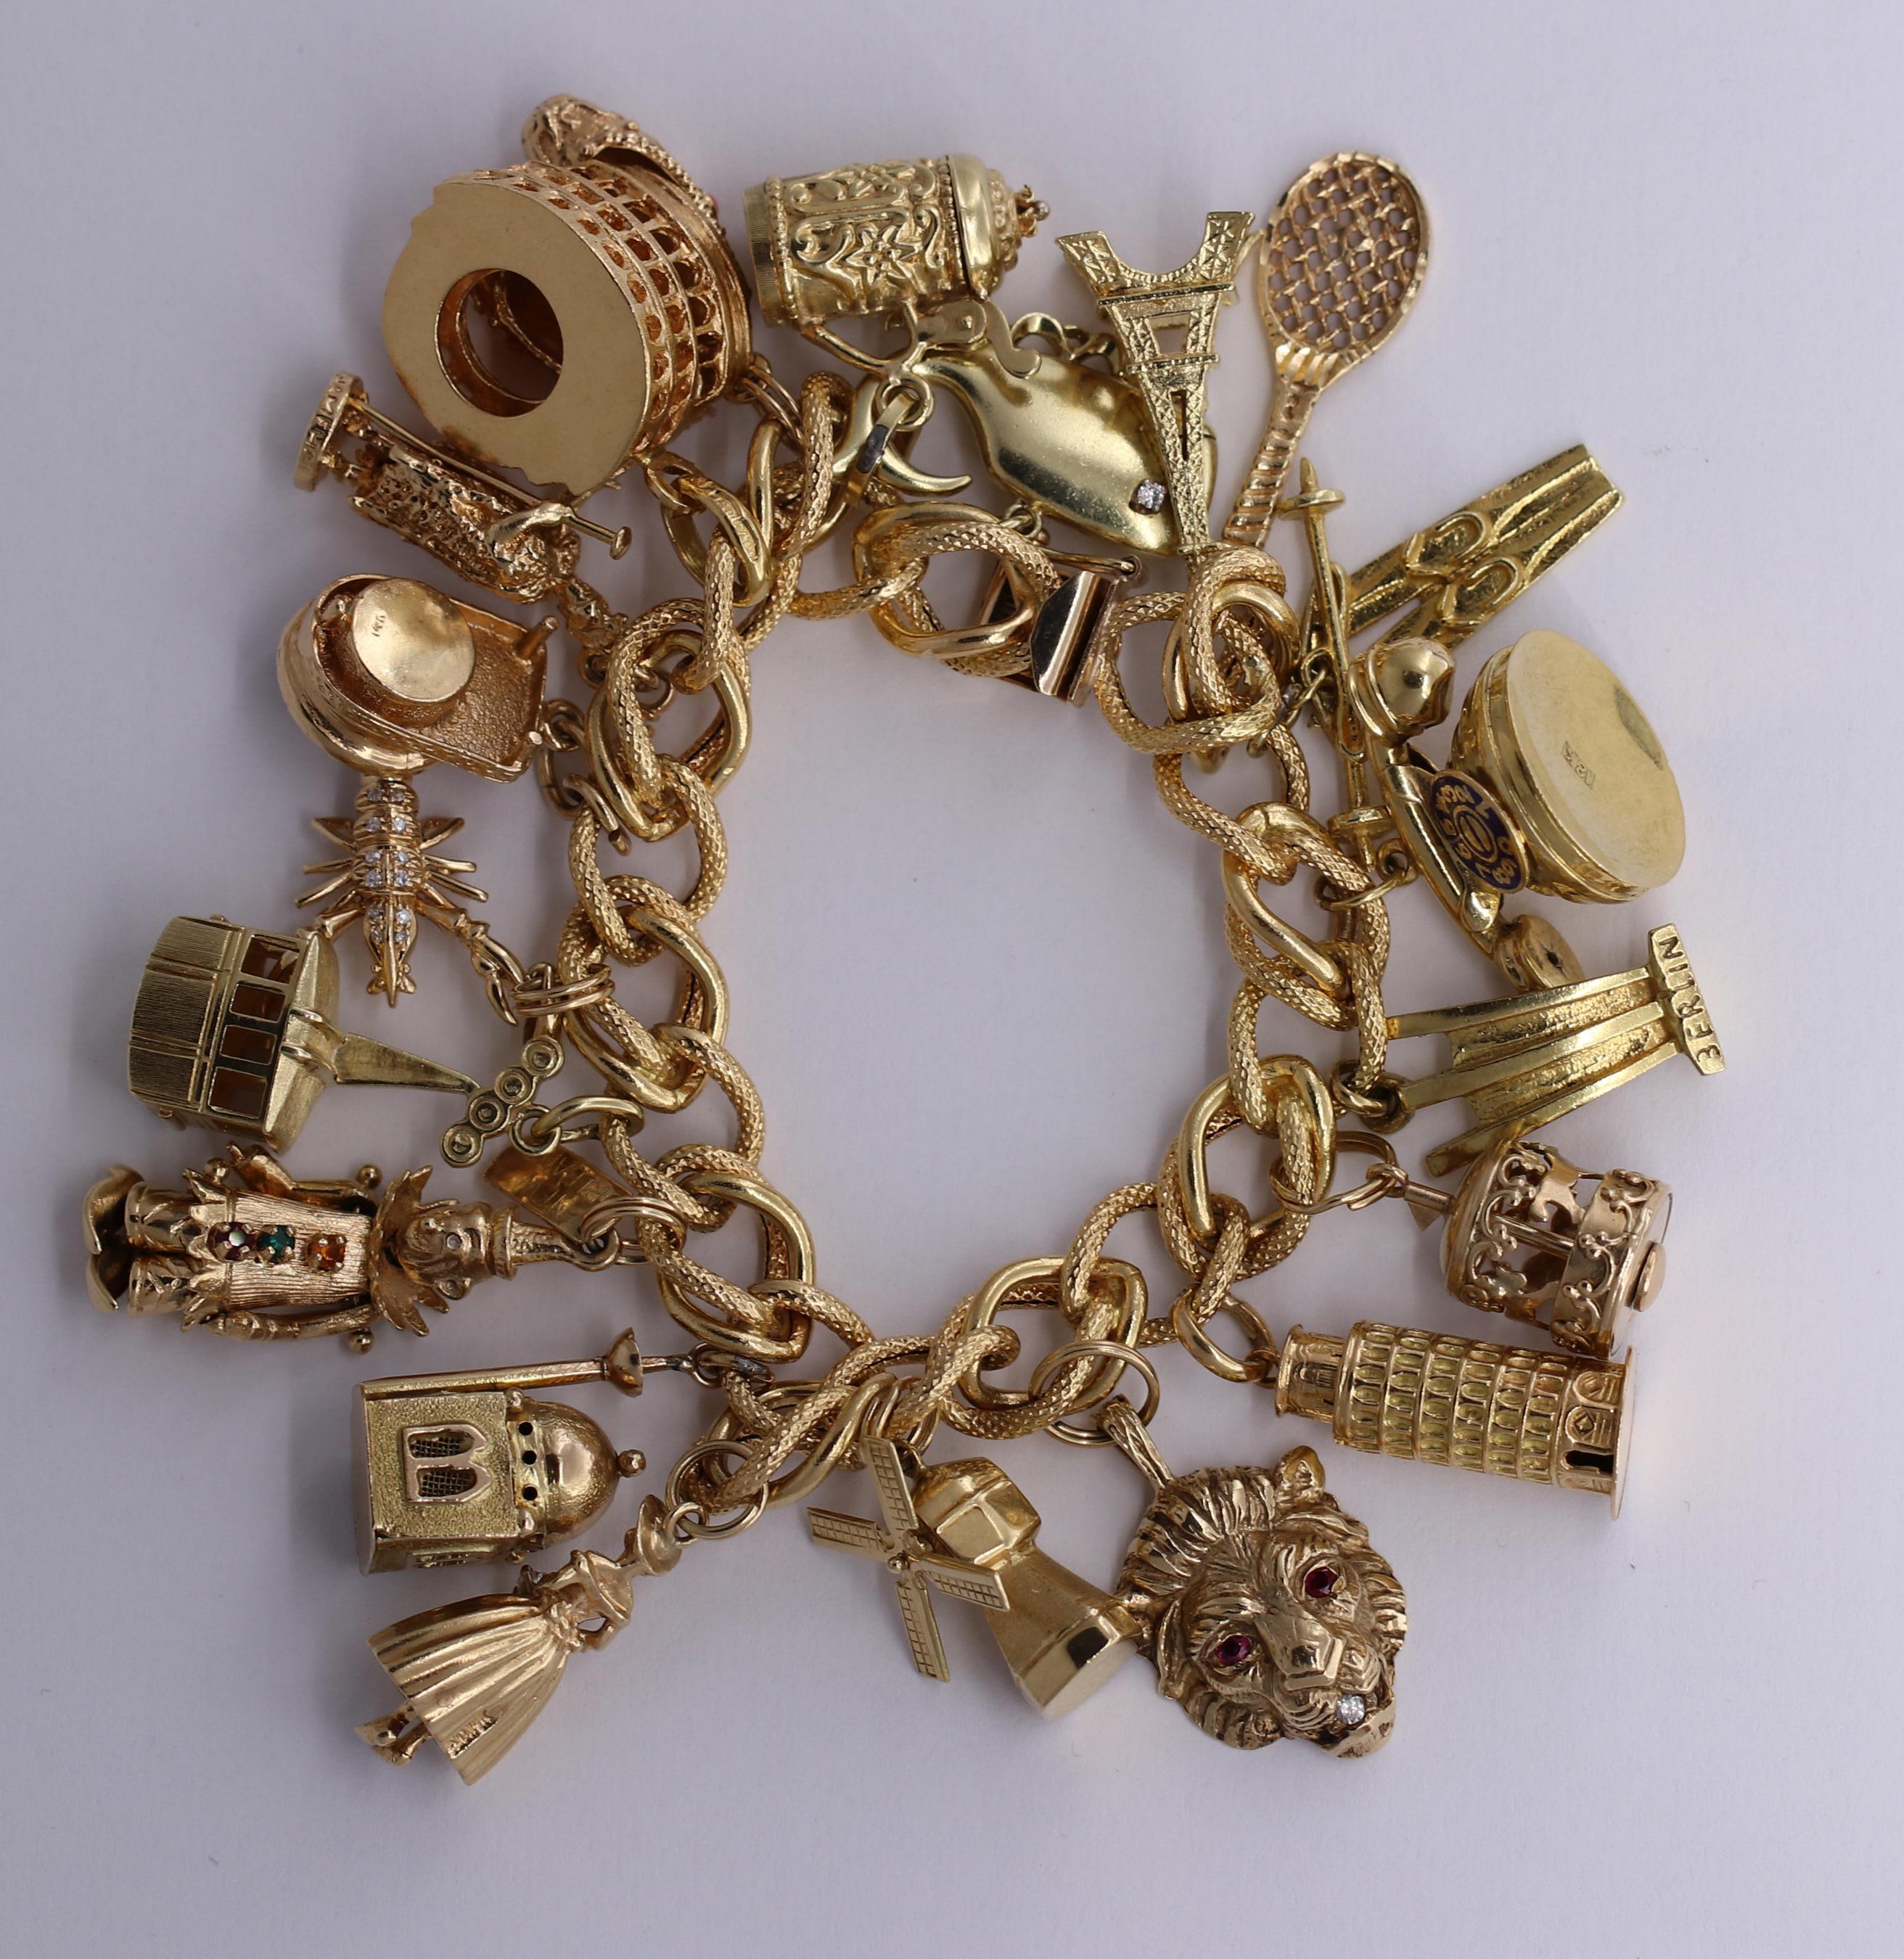 A festive charm bracelet on a 14K yellow gold spiral links with interlocking Florentine finished and high polished links. There are three, 18K charms: the tower of Pisa, The Colosseum, and a rotary phone with enameled dial. There is also a German